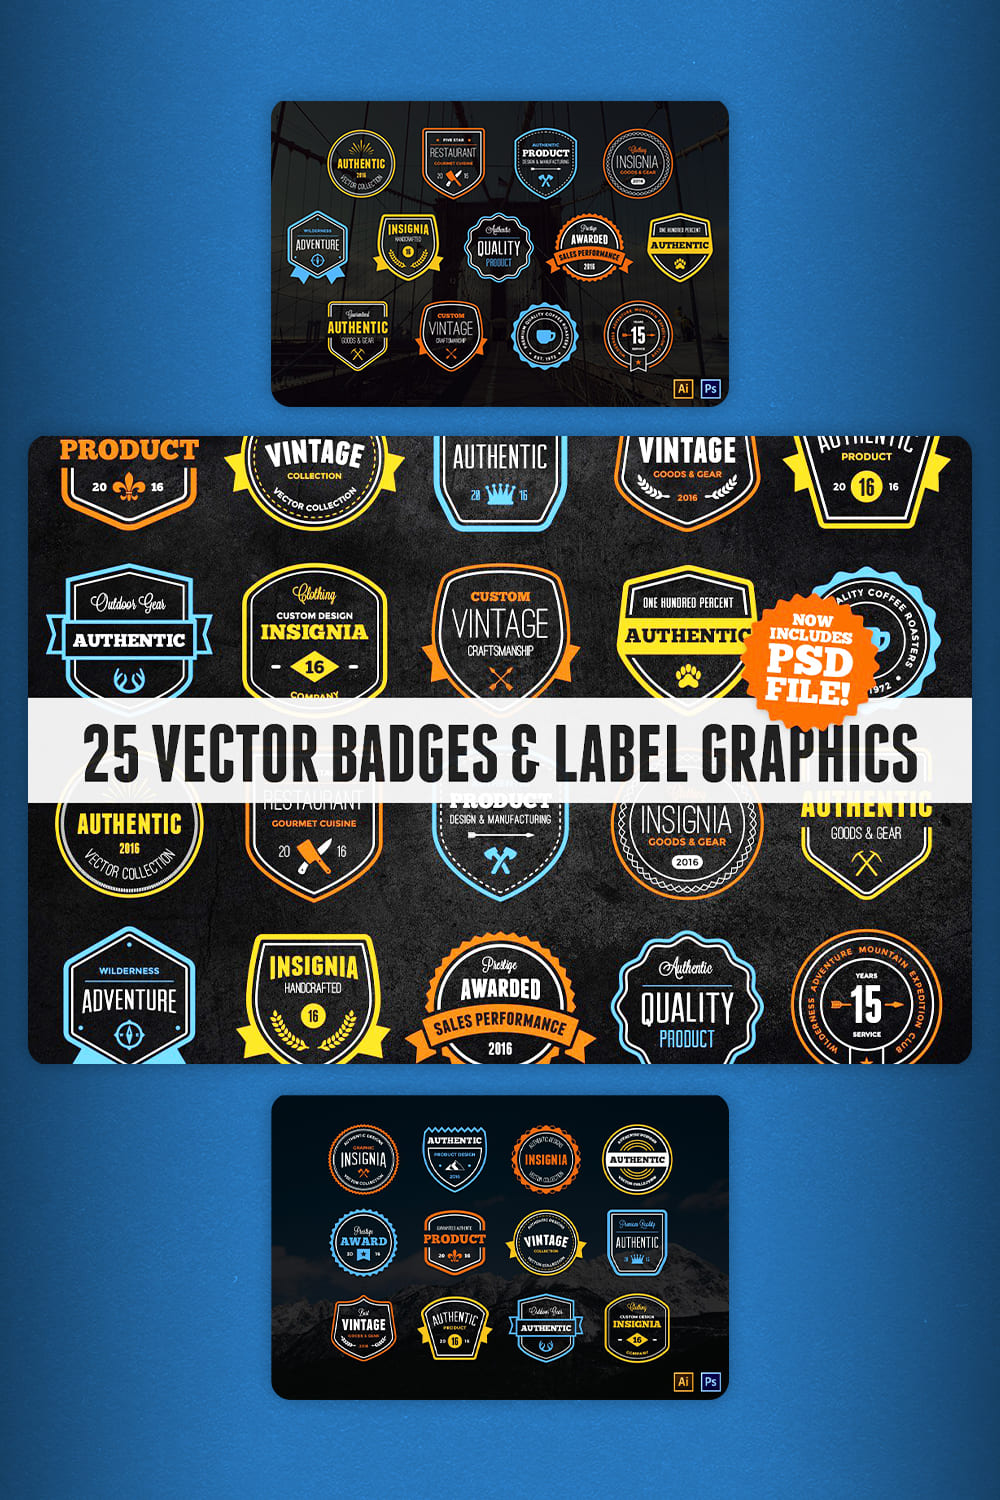 Badge Collection Pinterest image.